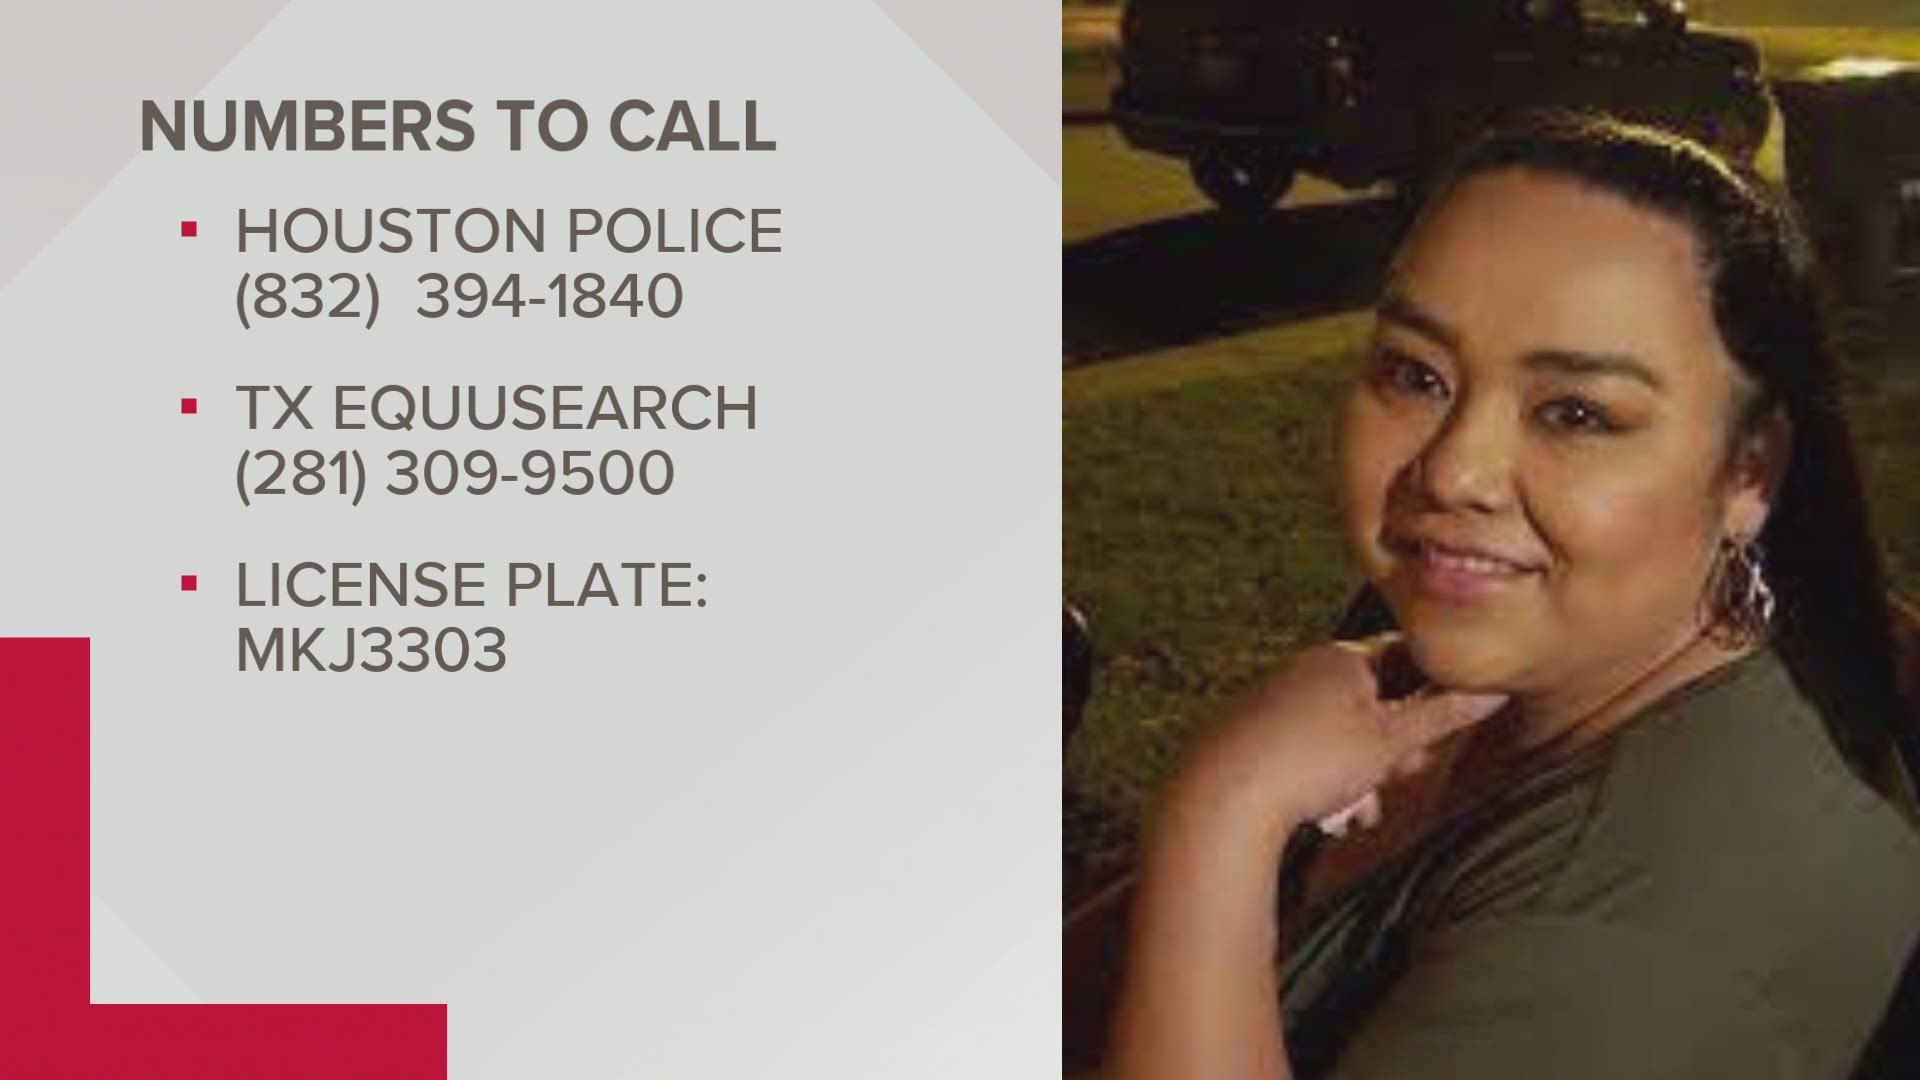 Houston police, along with Congresswoman Shelia Jackson Lee, has asked the FBI to join in the search for Erica Hernandez.